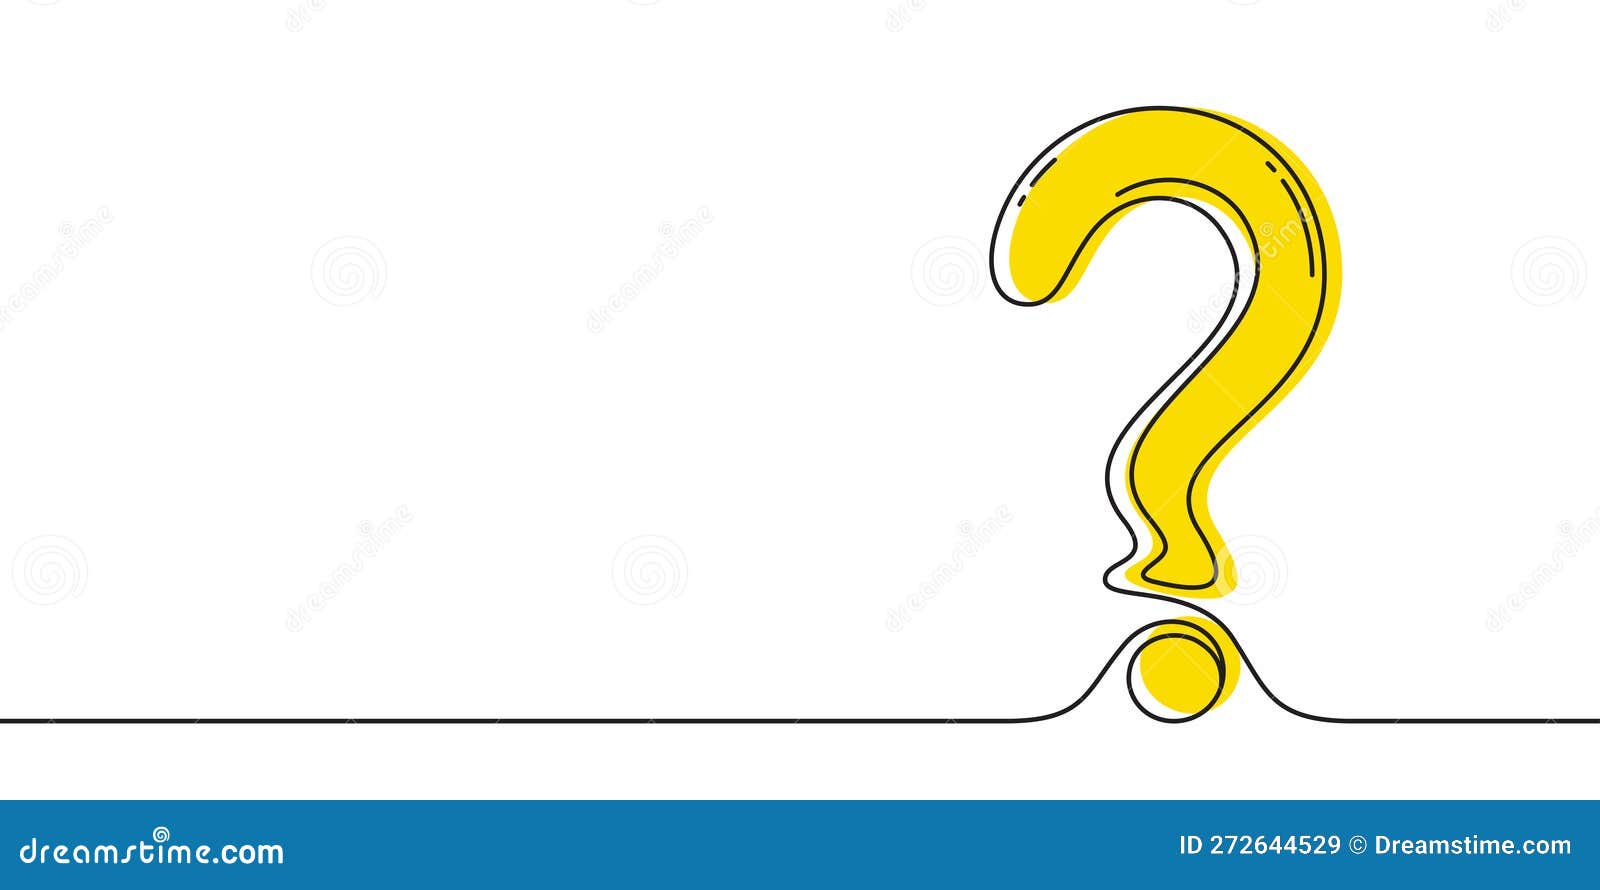 Premium Vector | Hand drawn ink question mark illustration in sketch style  single element for design